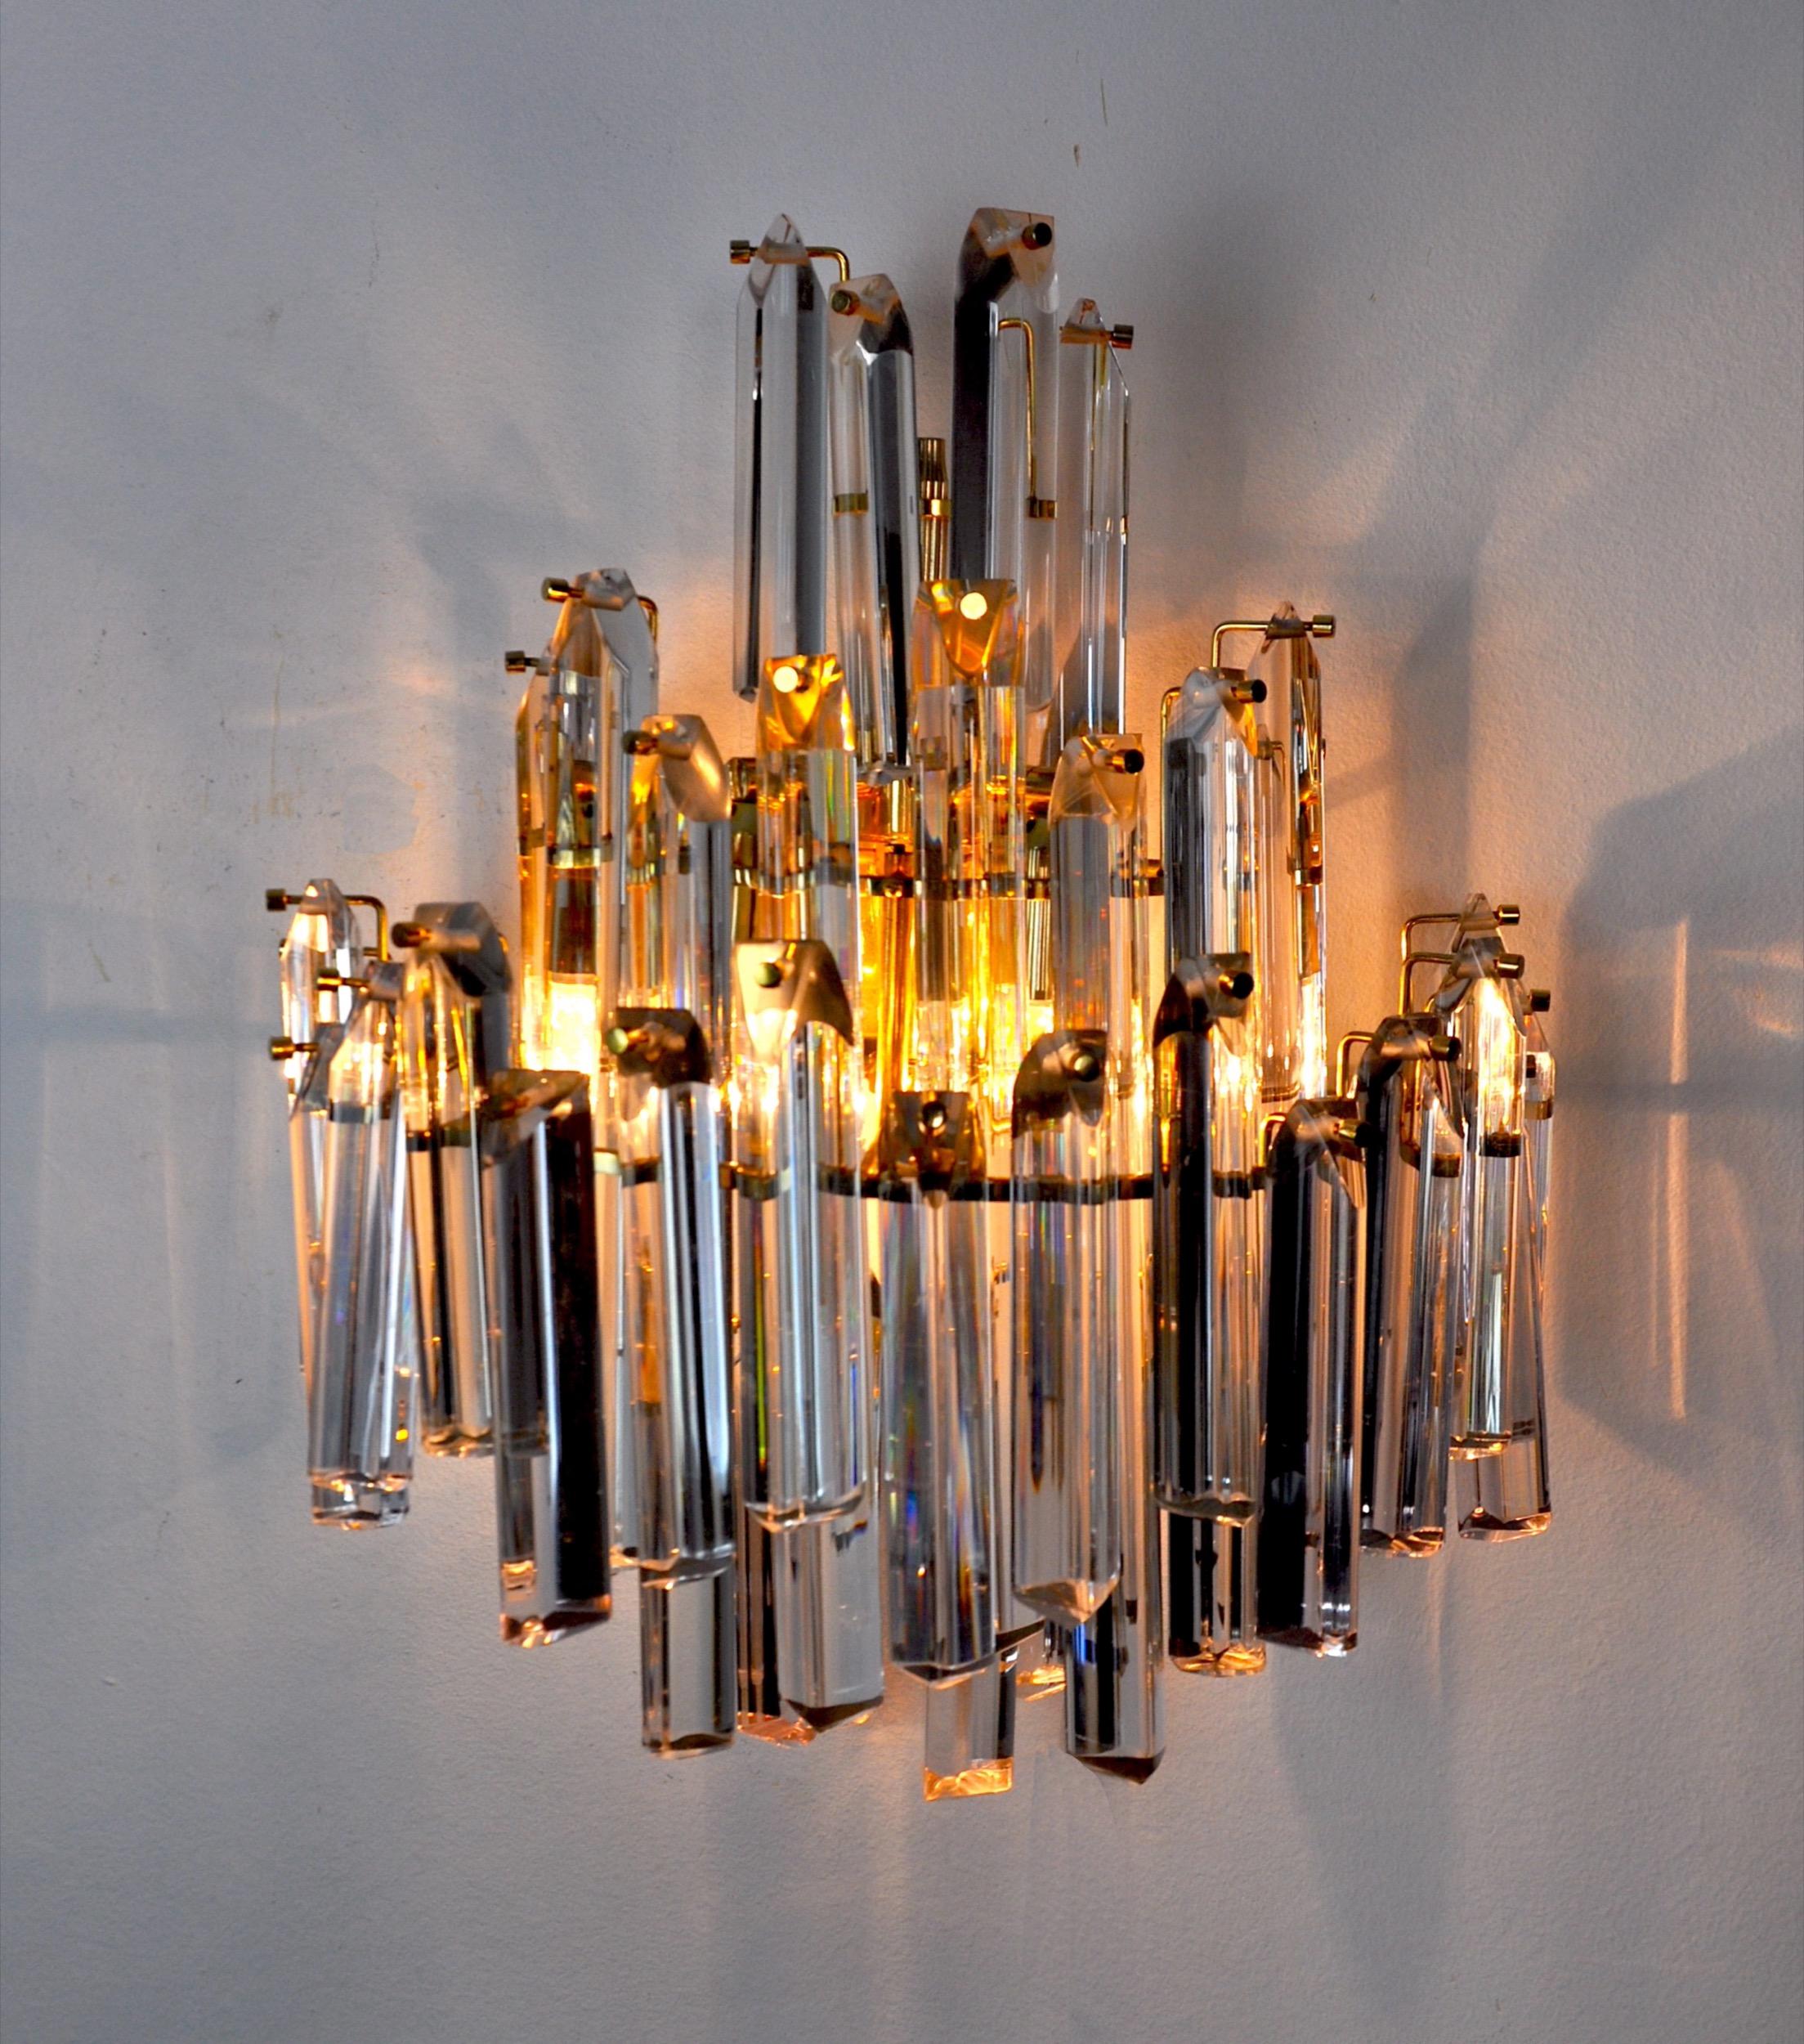 Superb and rare Venini wall lamp 3 levels dating from the 70s.

Murano glass and gilded metal structure.

Unique object that will illuminate and bring a real design touch to your interior.

Verified electricity, time mark consistent with the